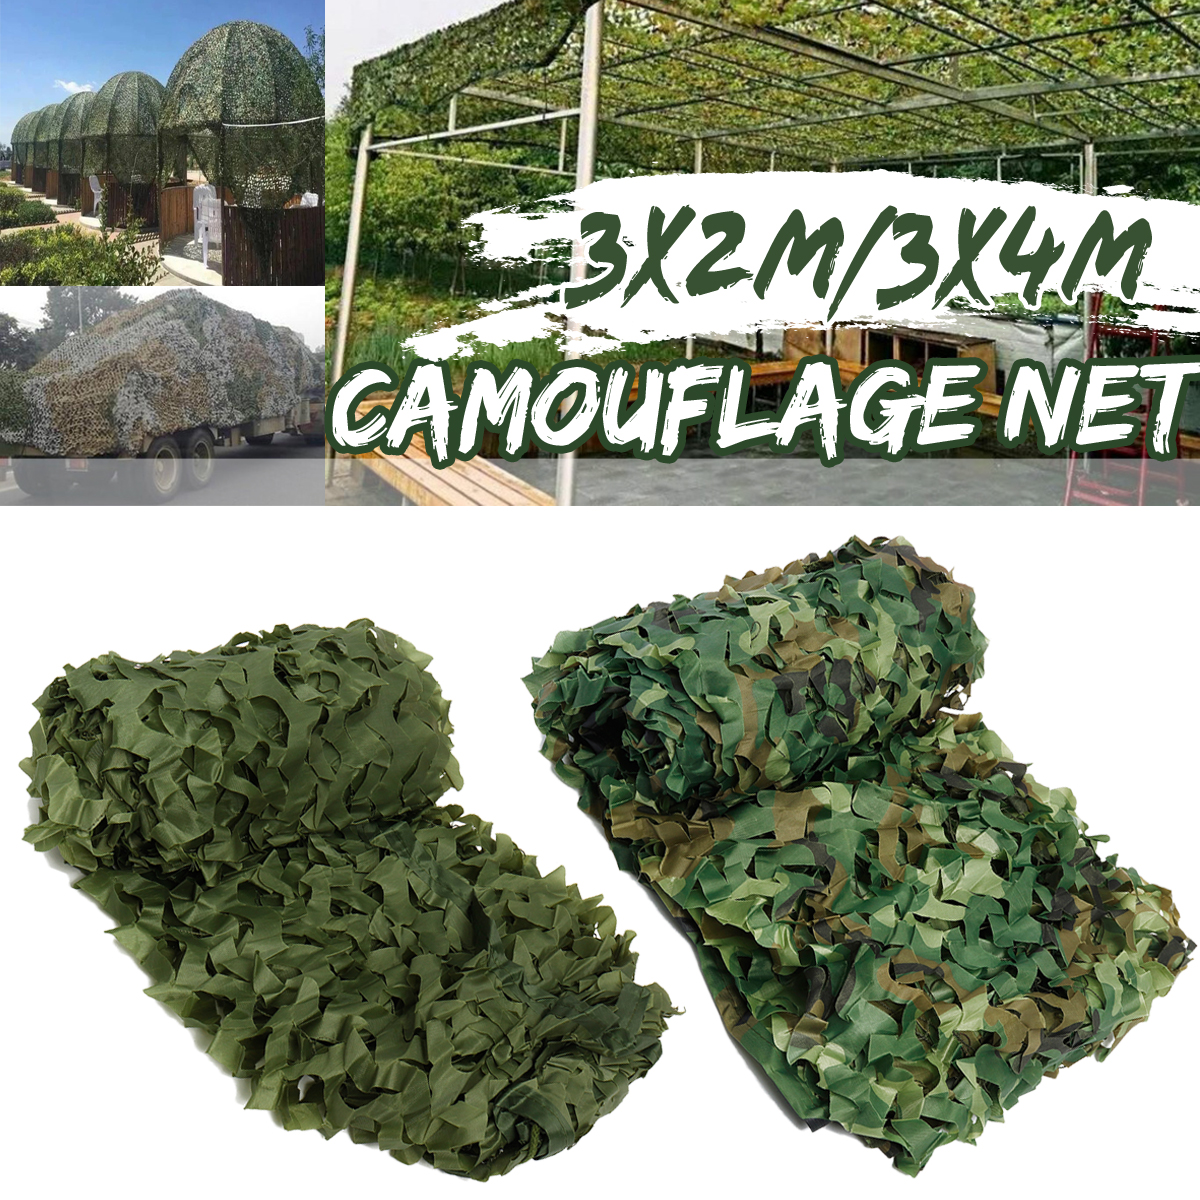 Camouflage-Army-Green-Trap-Net-Military-Hunting-Trap-Woodland-Leaves-Sunshade-Net-1556941-1